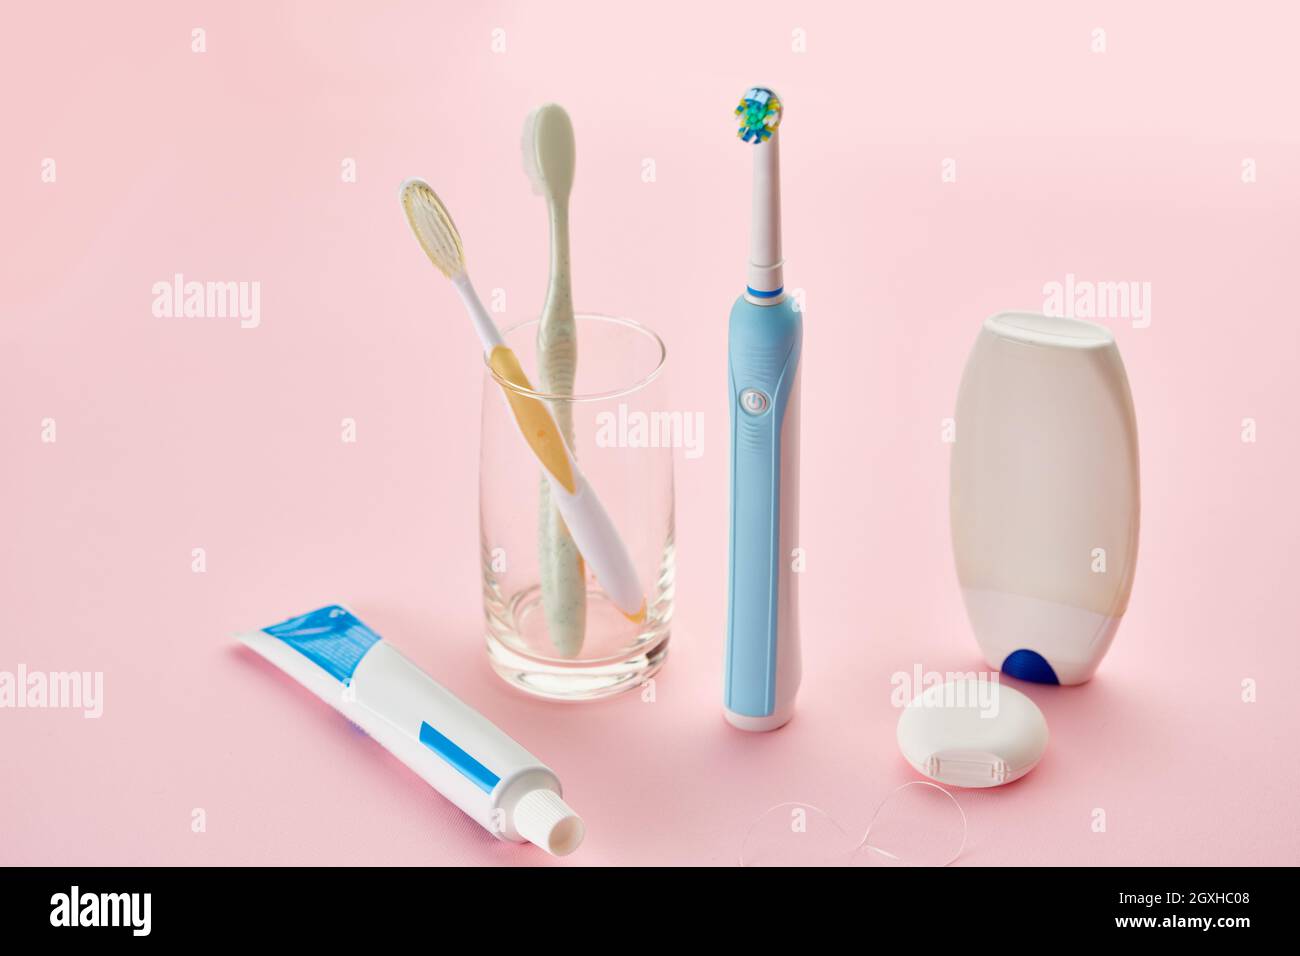 Oral care products, toothbrush, toothpaste and dental floss, pink  background, nobody. Morning healthcare procedures concept Stock Photo -  Alamy